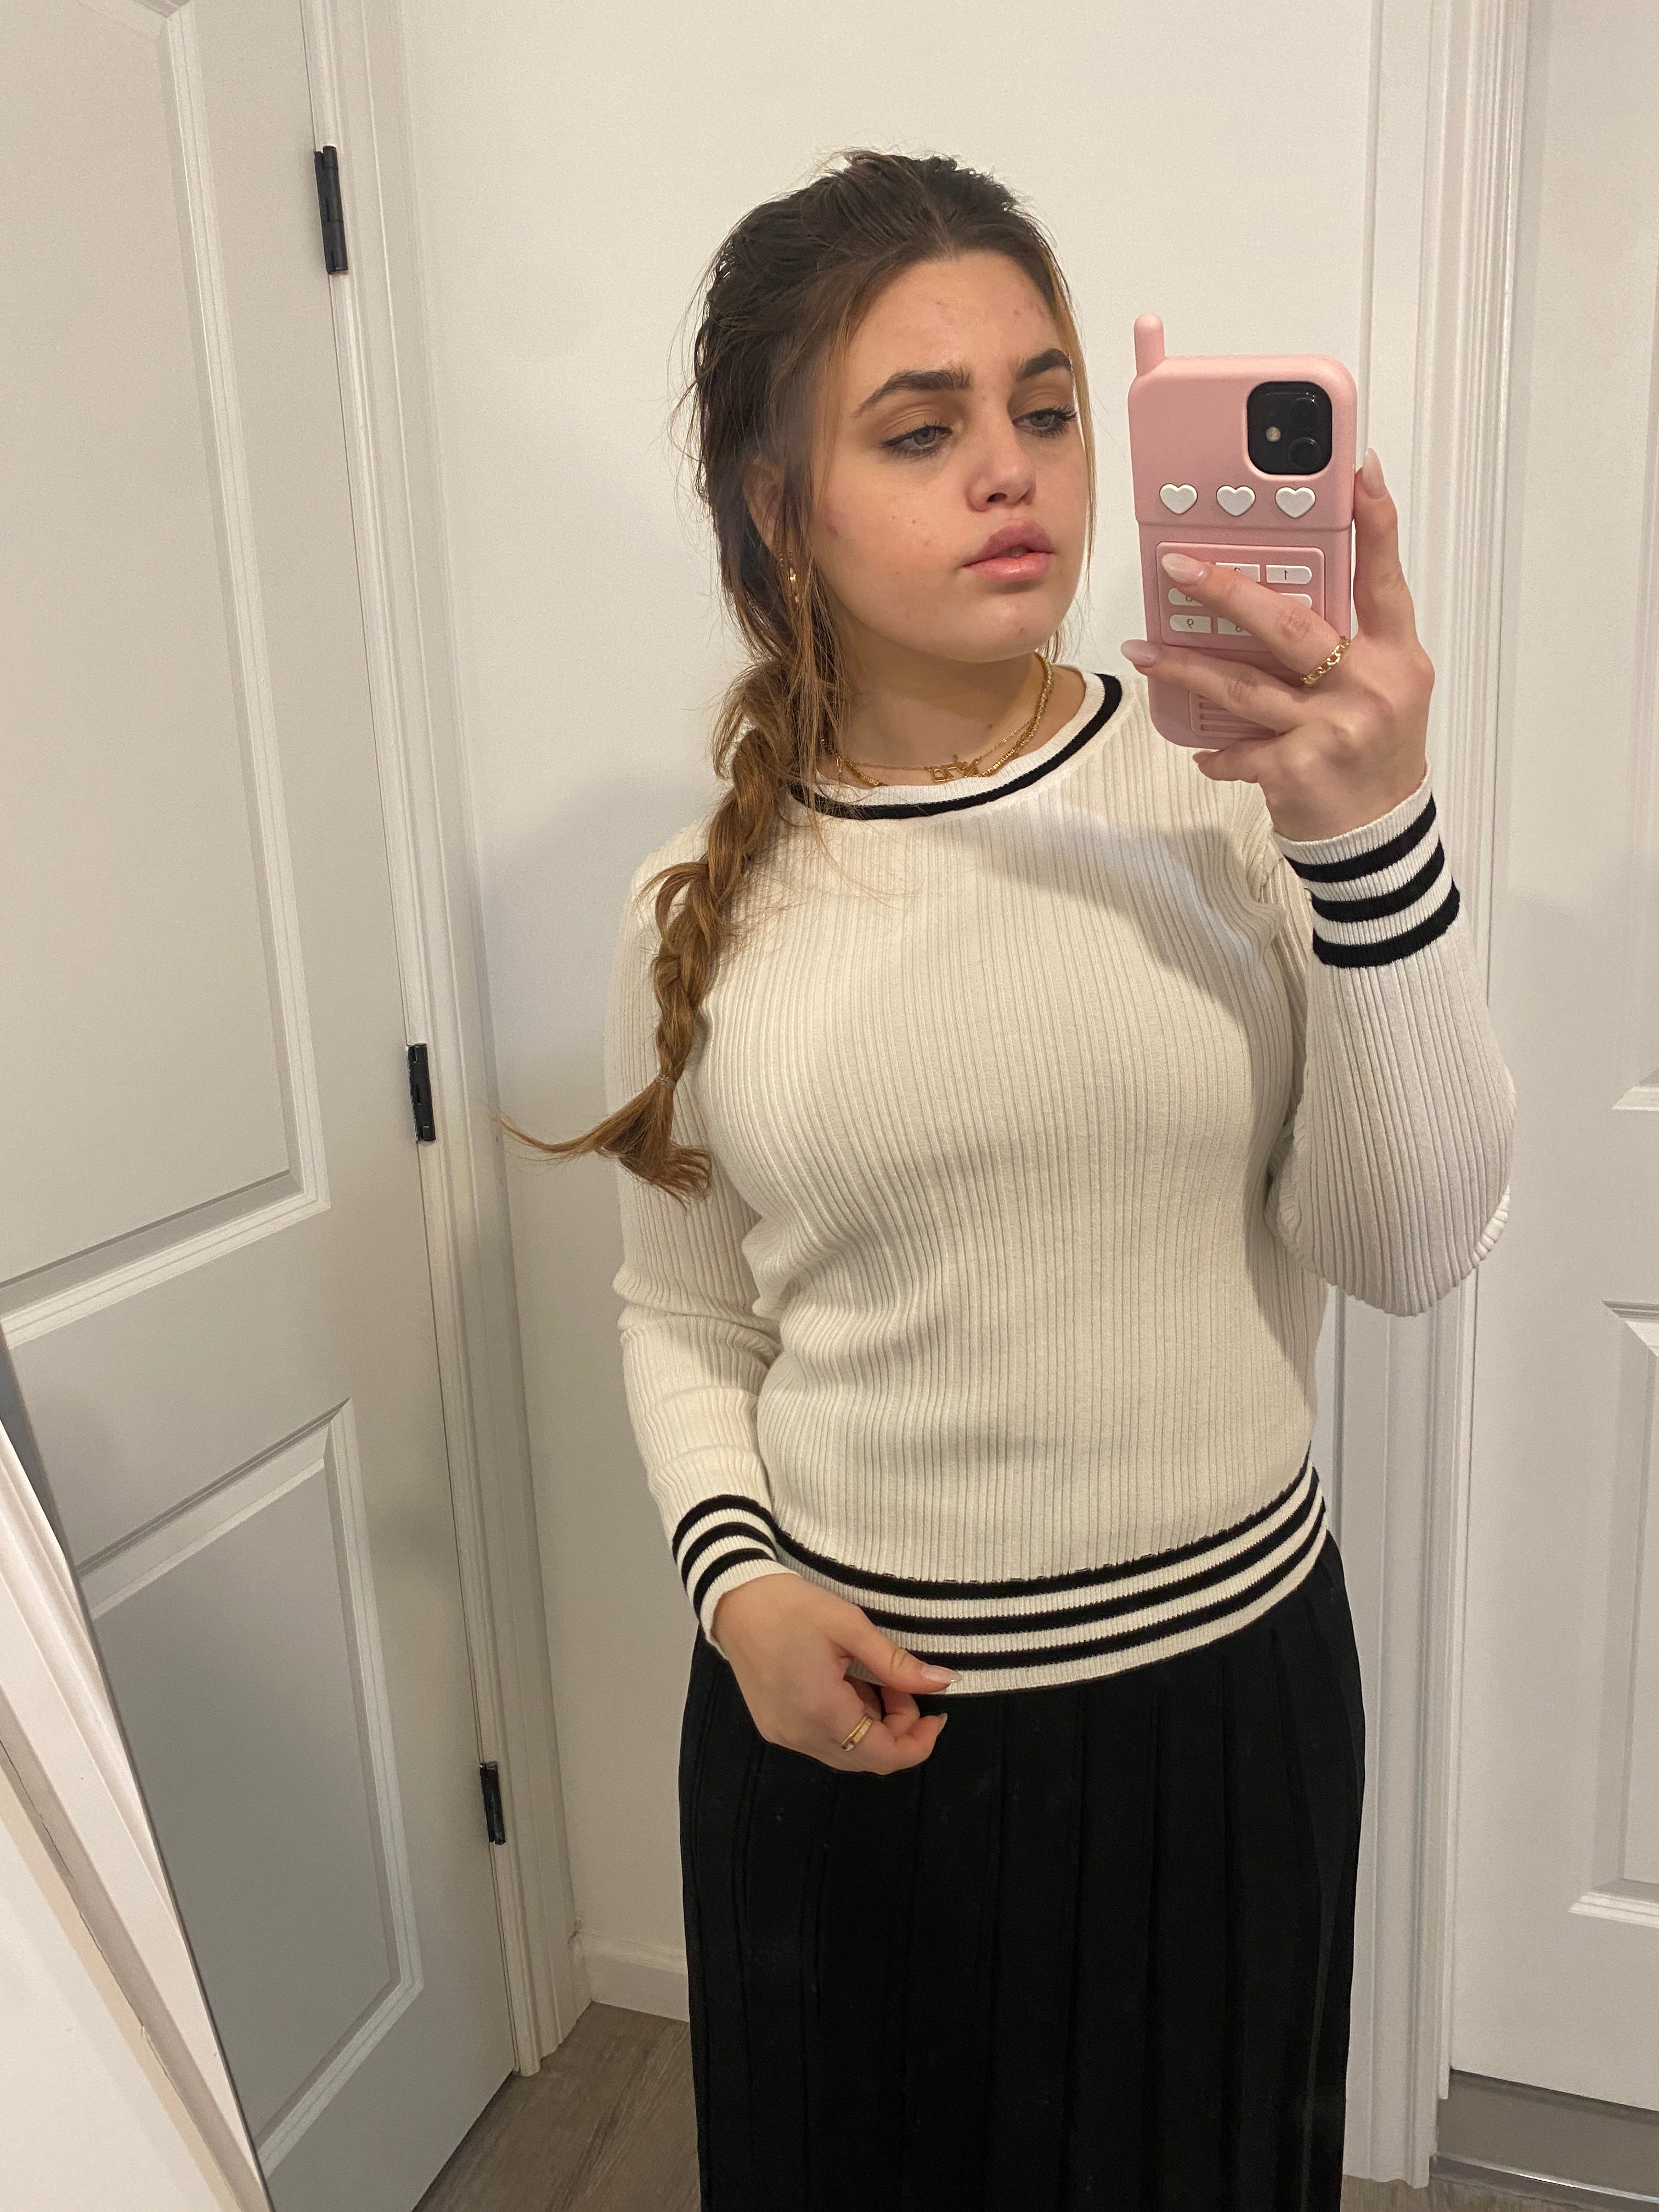 Ribbed Knit Striped Top